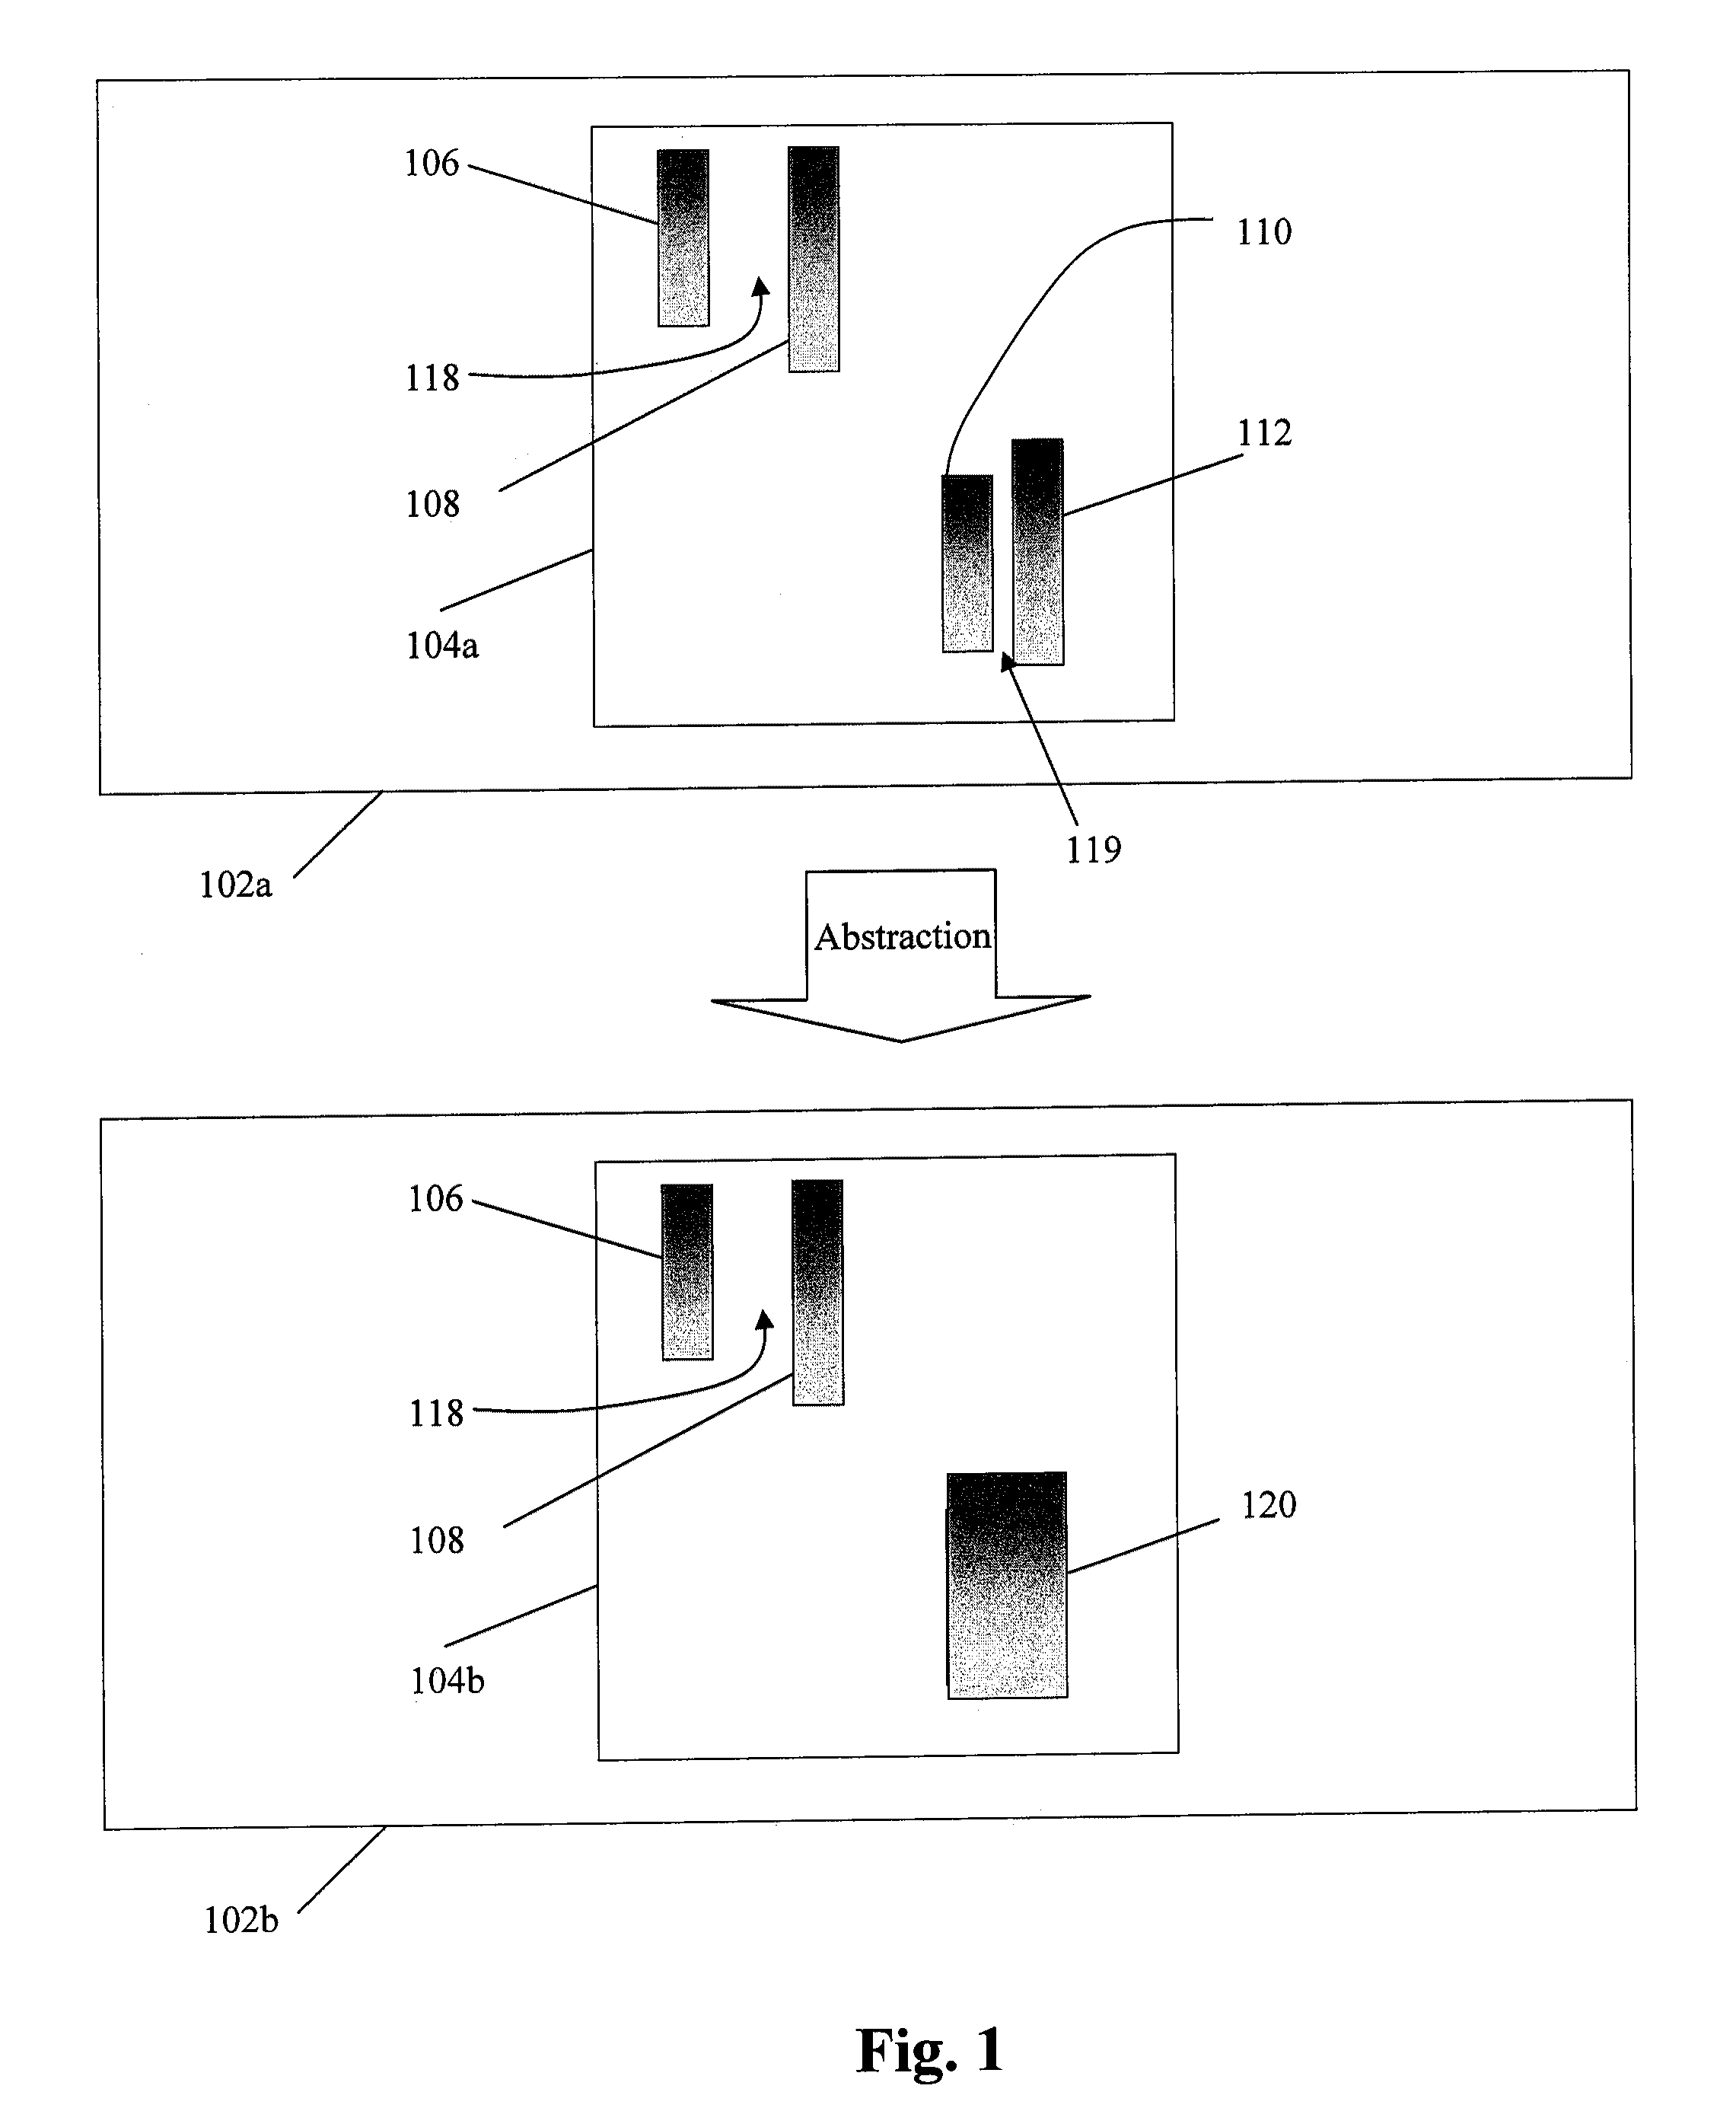 Method and system for implementing abstract layout structures with parameterized cells